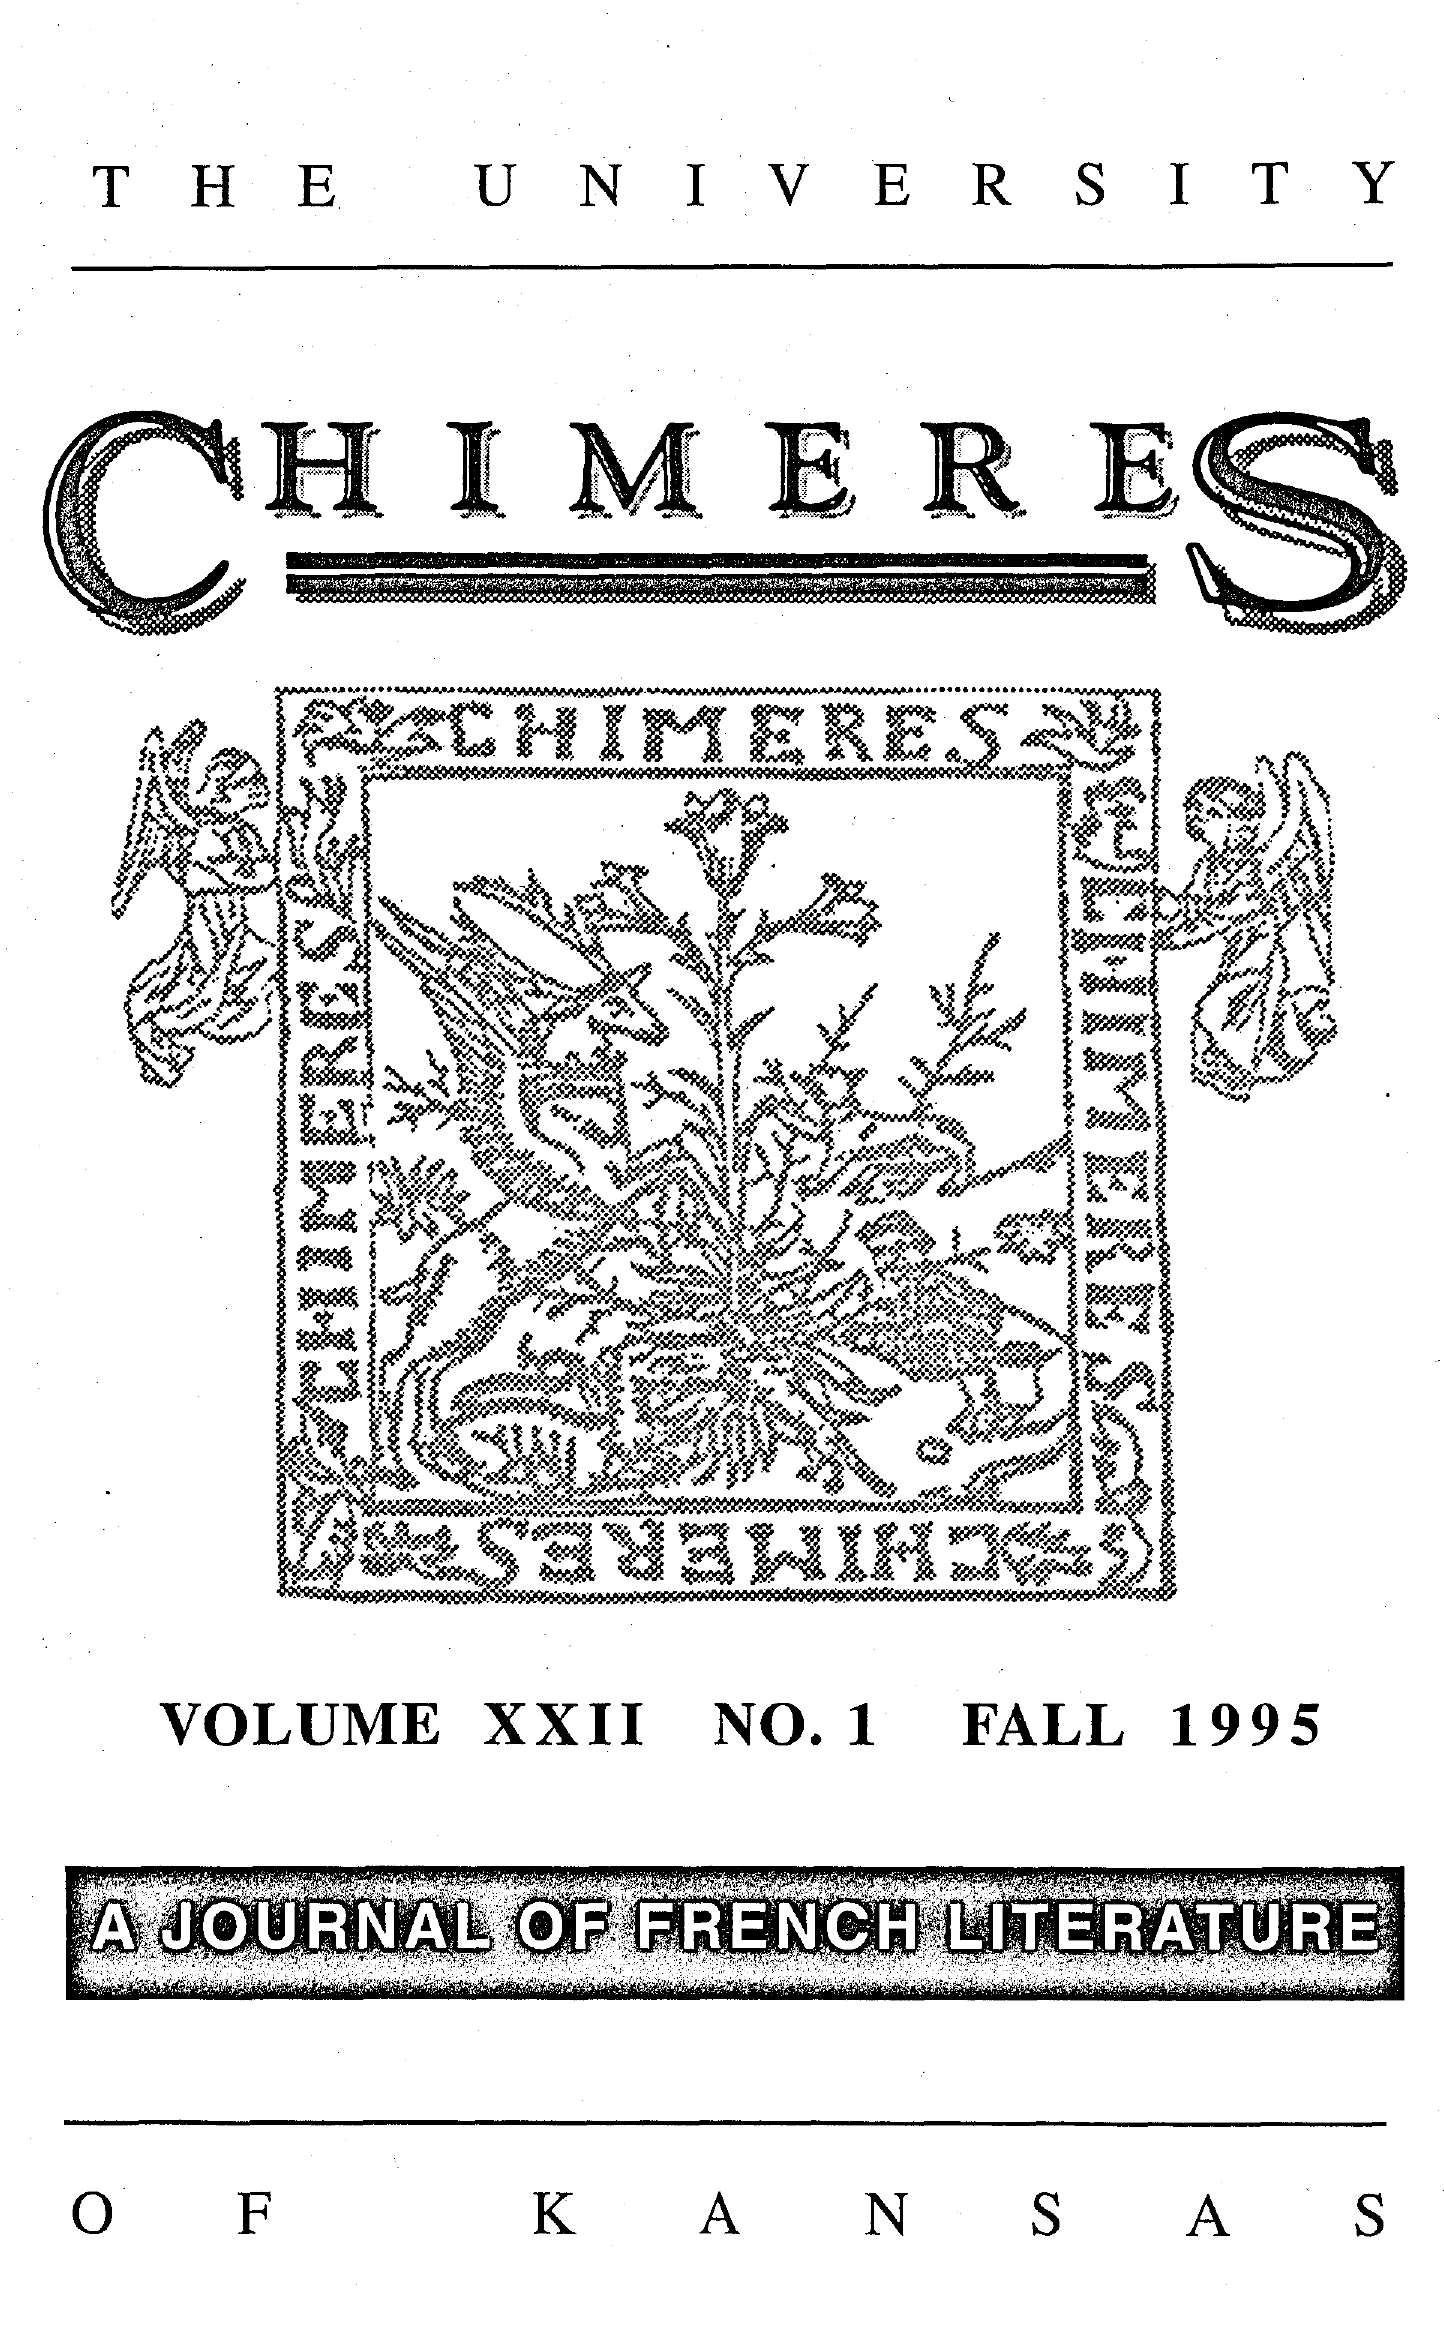 Cover for Chimères, Vol. 22.1, Fall 1995